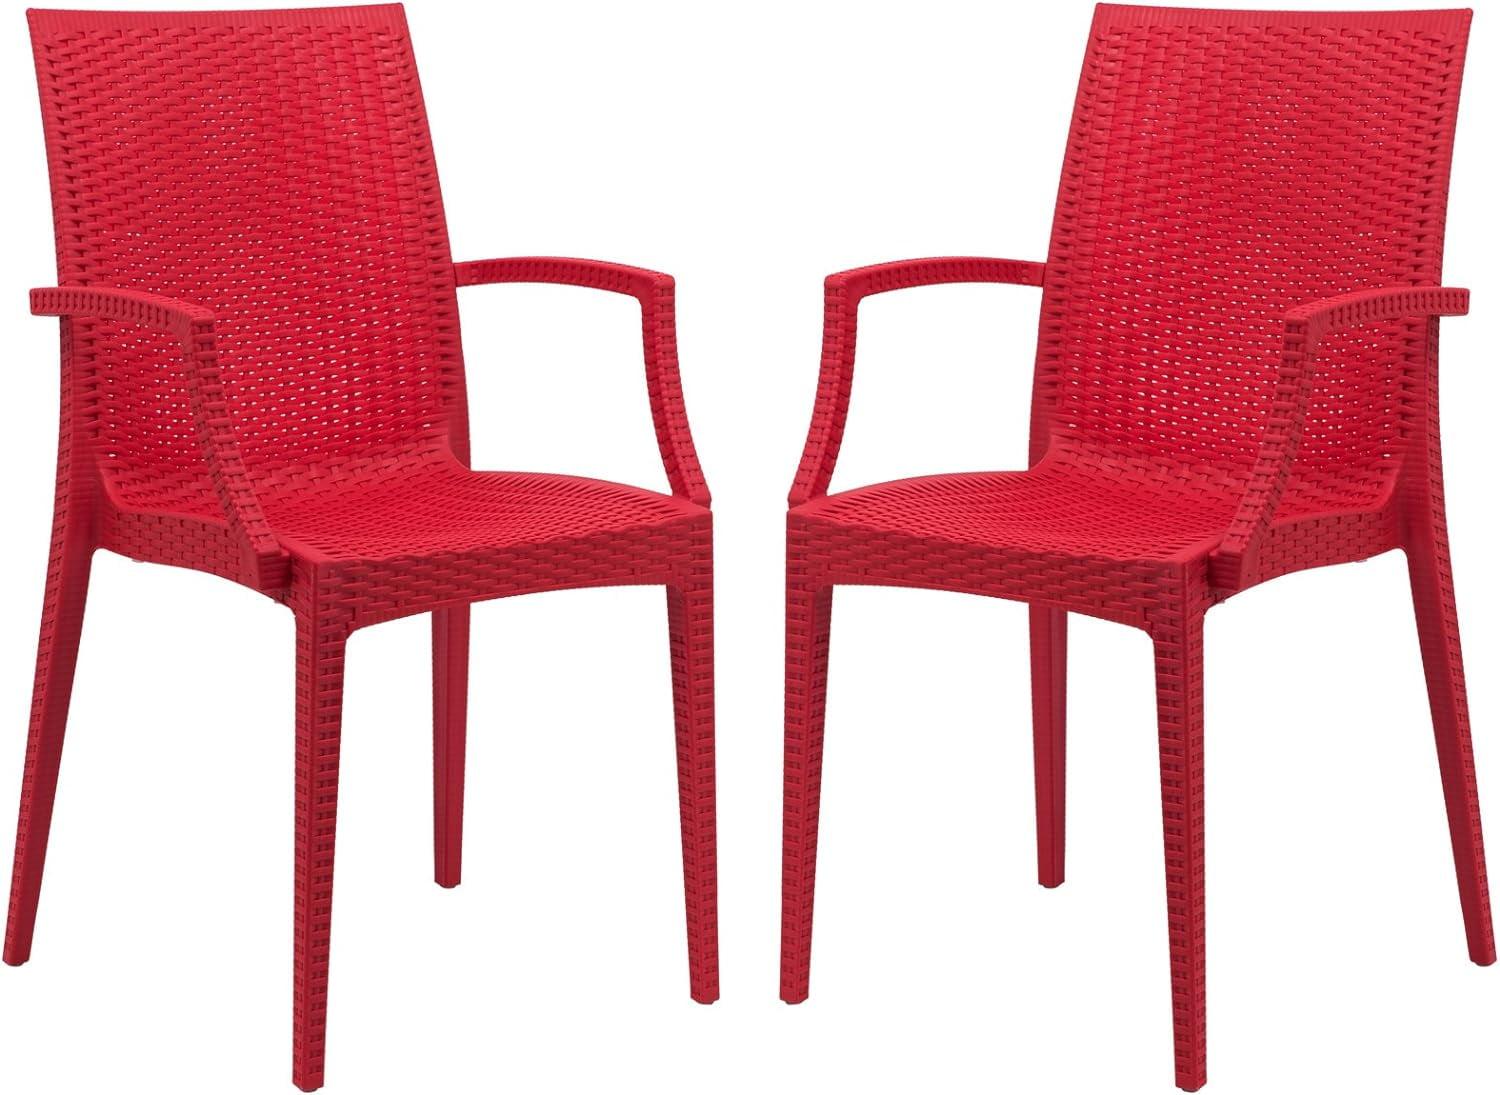 Modernist Red Weave Indoor/Outdoor Dining Chair Set of 2